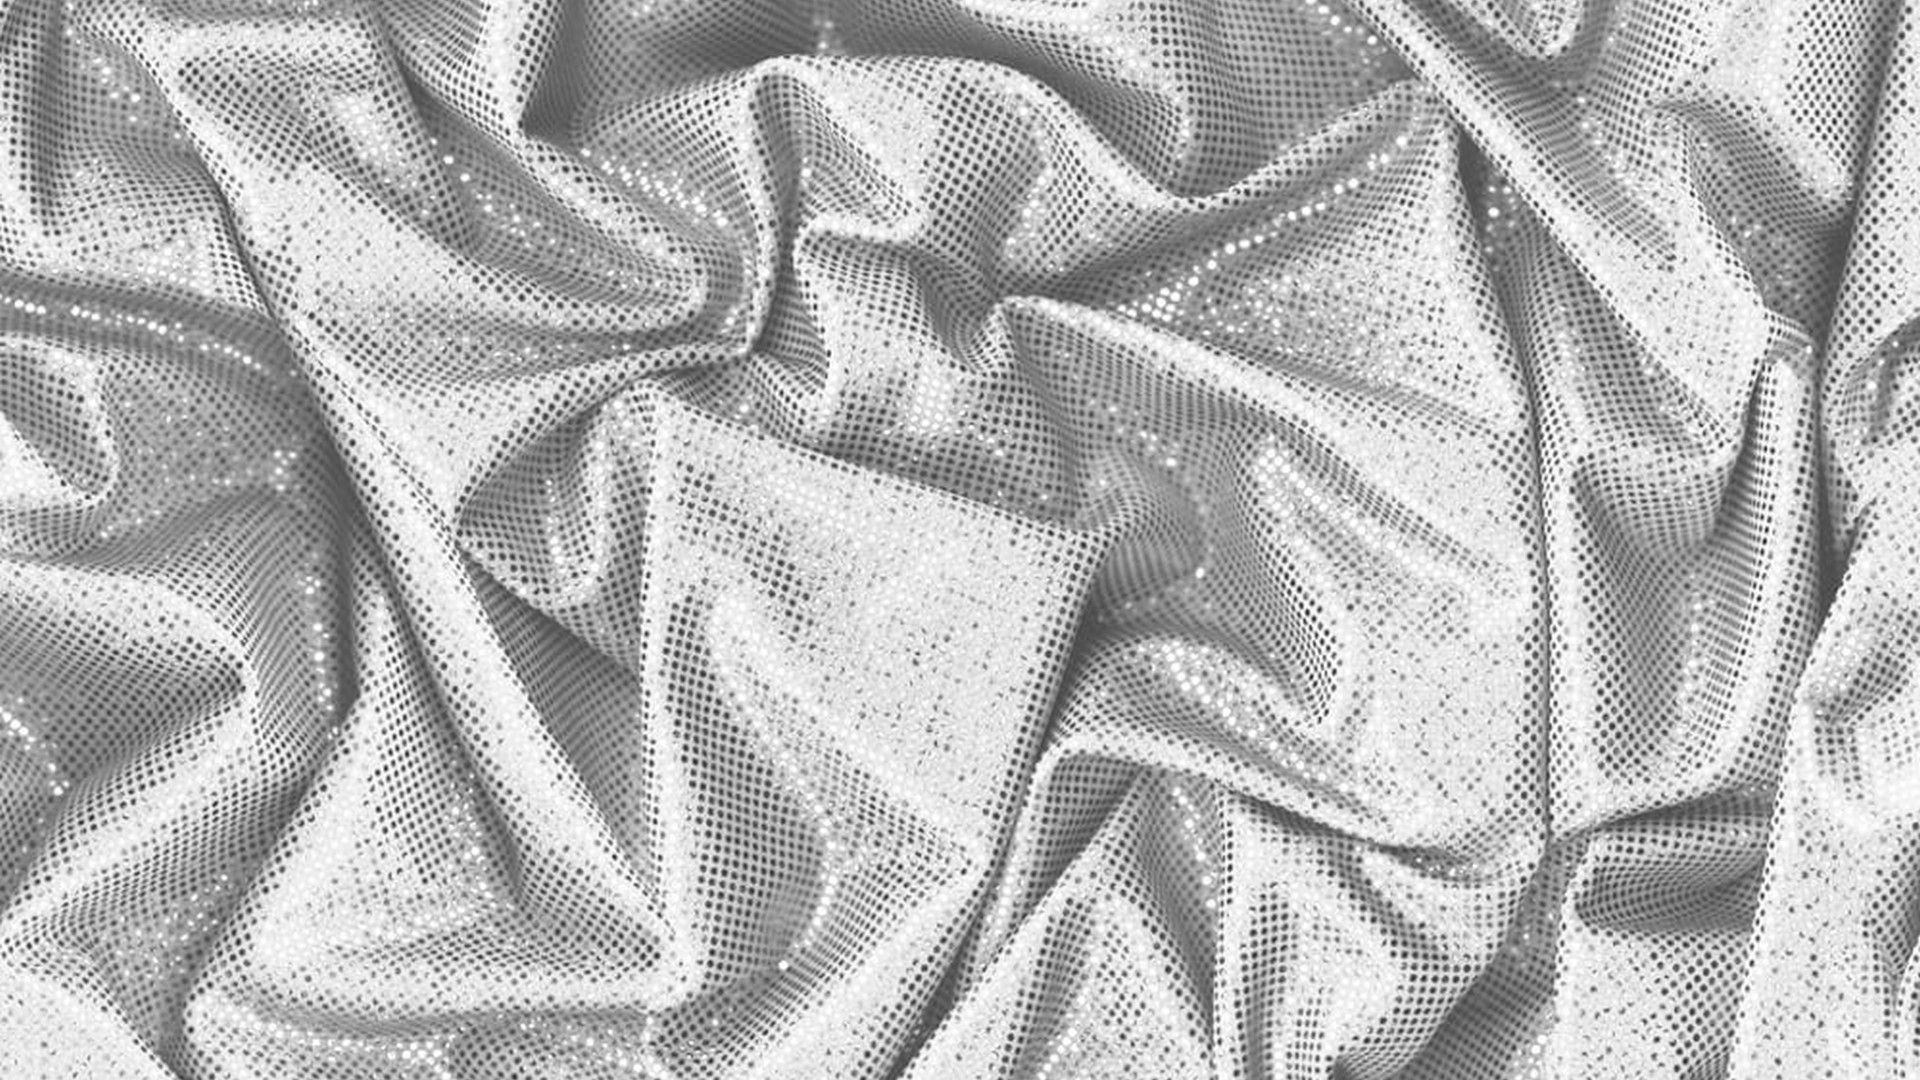 A white fabric with a mesh pattern. - Silver